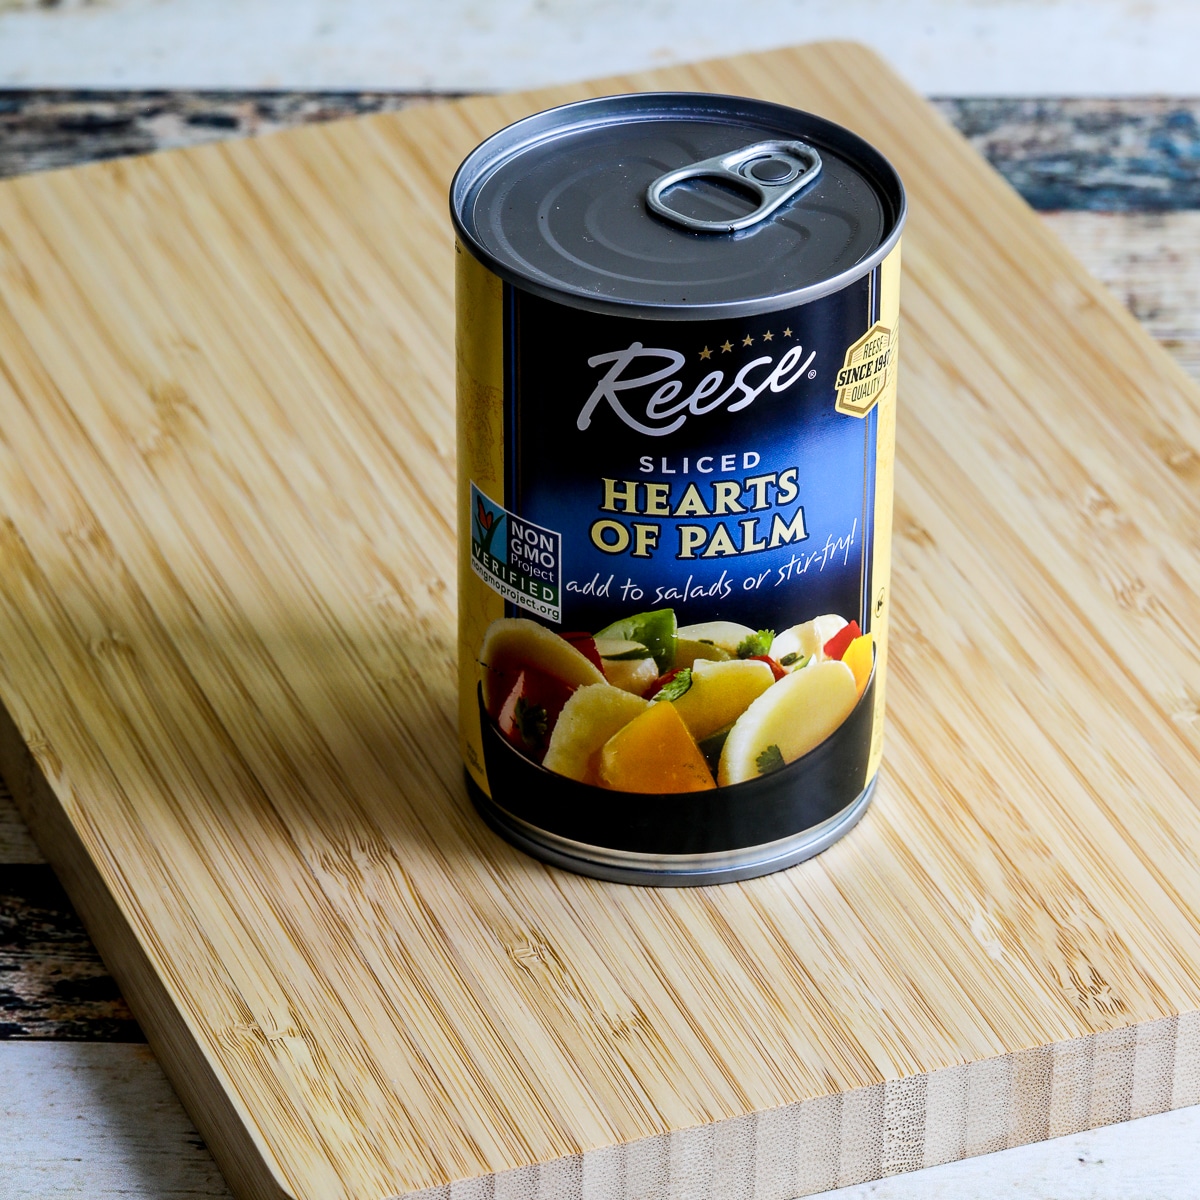 Square image of can of hearts of palm on cutting board.